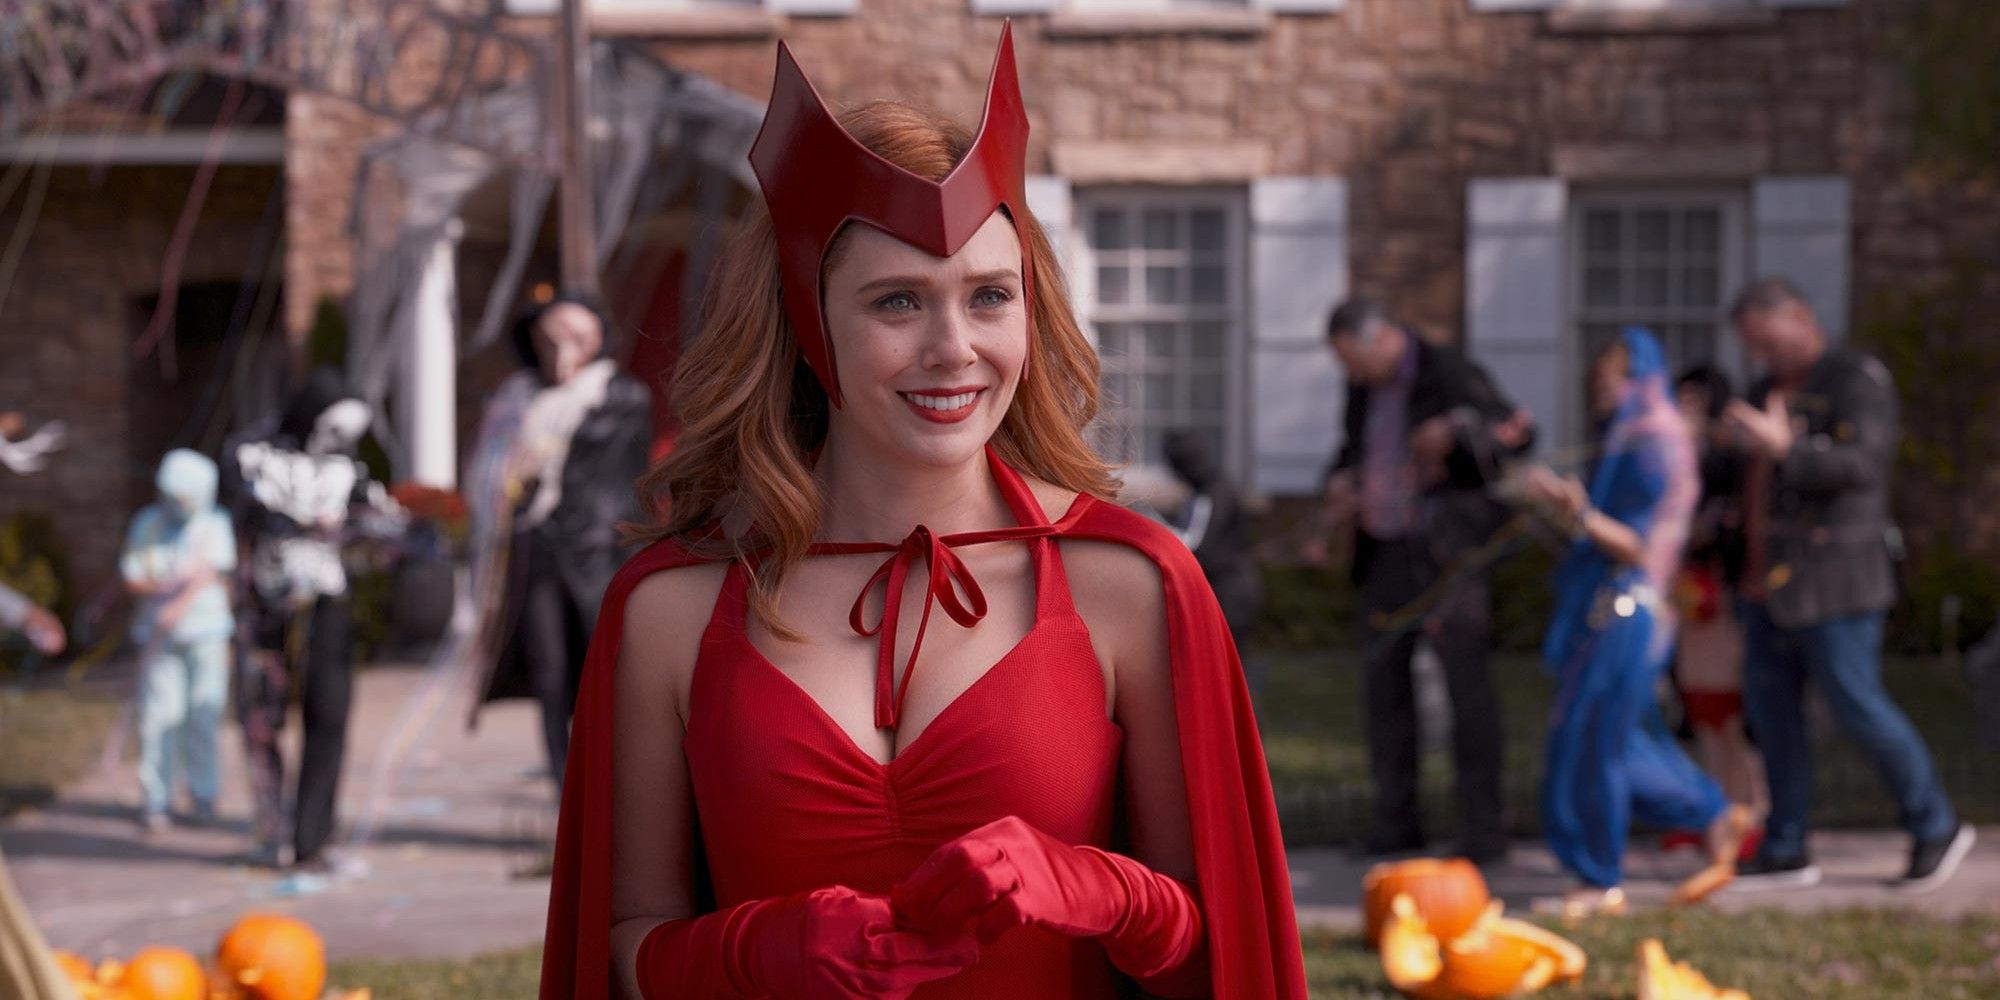 The Scarlet Witch in her Halloween costume.